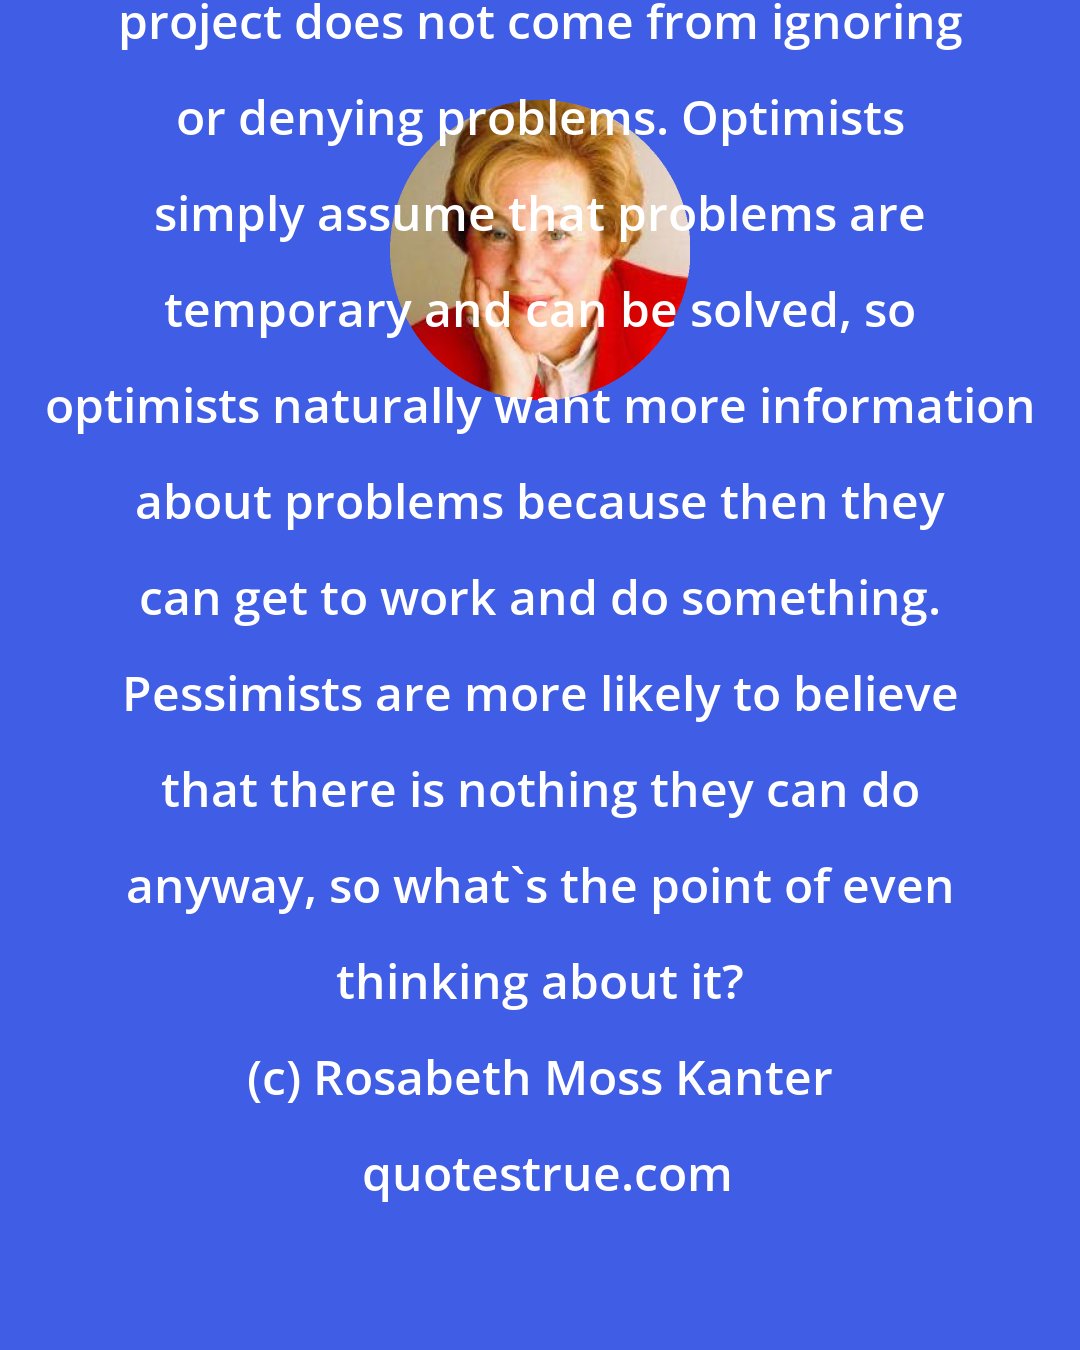 Rosabeth Moss Kanter: The positive outlook that optimists project does not come from ignoring or denying problems. Optimists simply assume that problems are temporary and can be solved, so optimists naturally want more information about problems because then they can get to work and do something. Pessimists are more likely to believe that there is nothing they can do anyway, so what's the point of even thinking about it?